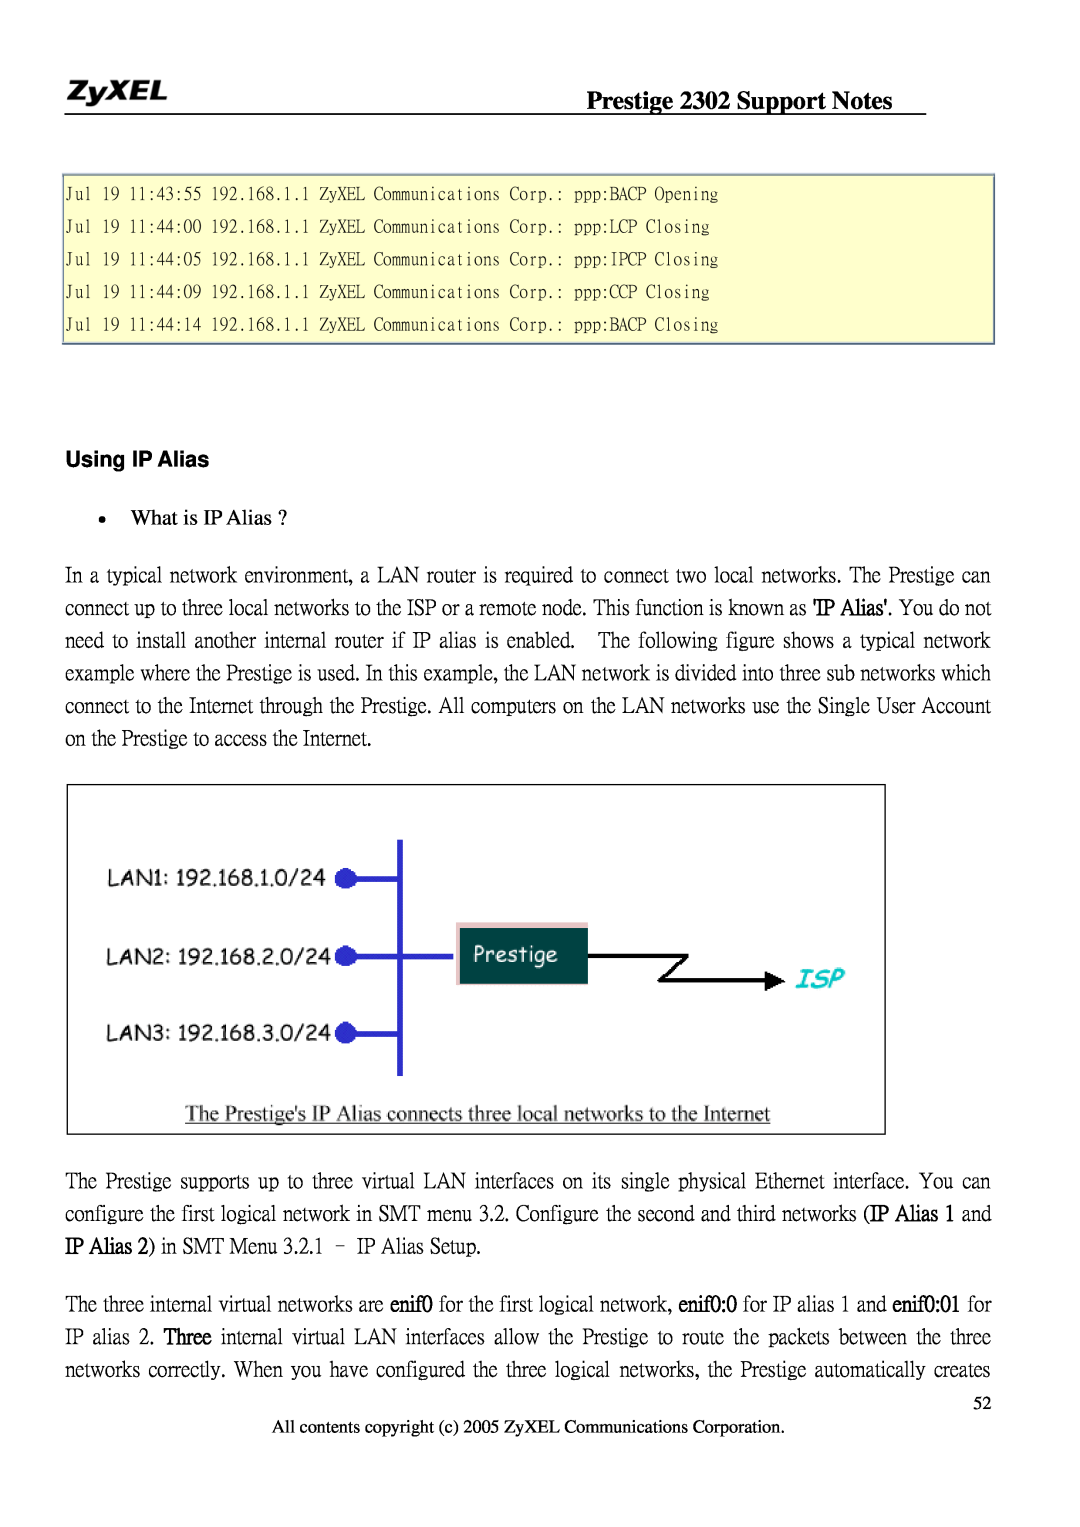 ZyXEL Communications P-2302HW manual Using IP Alias, Prestige 2302 Support Notes, What is IP Alias ? 